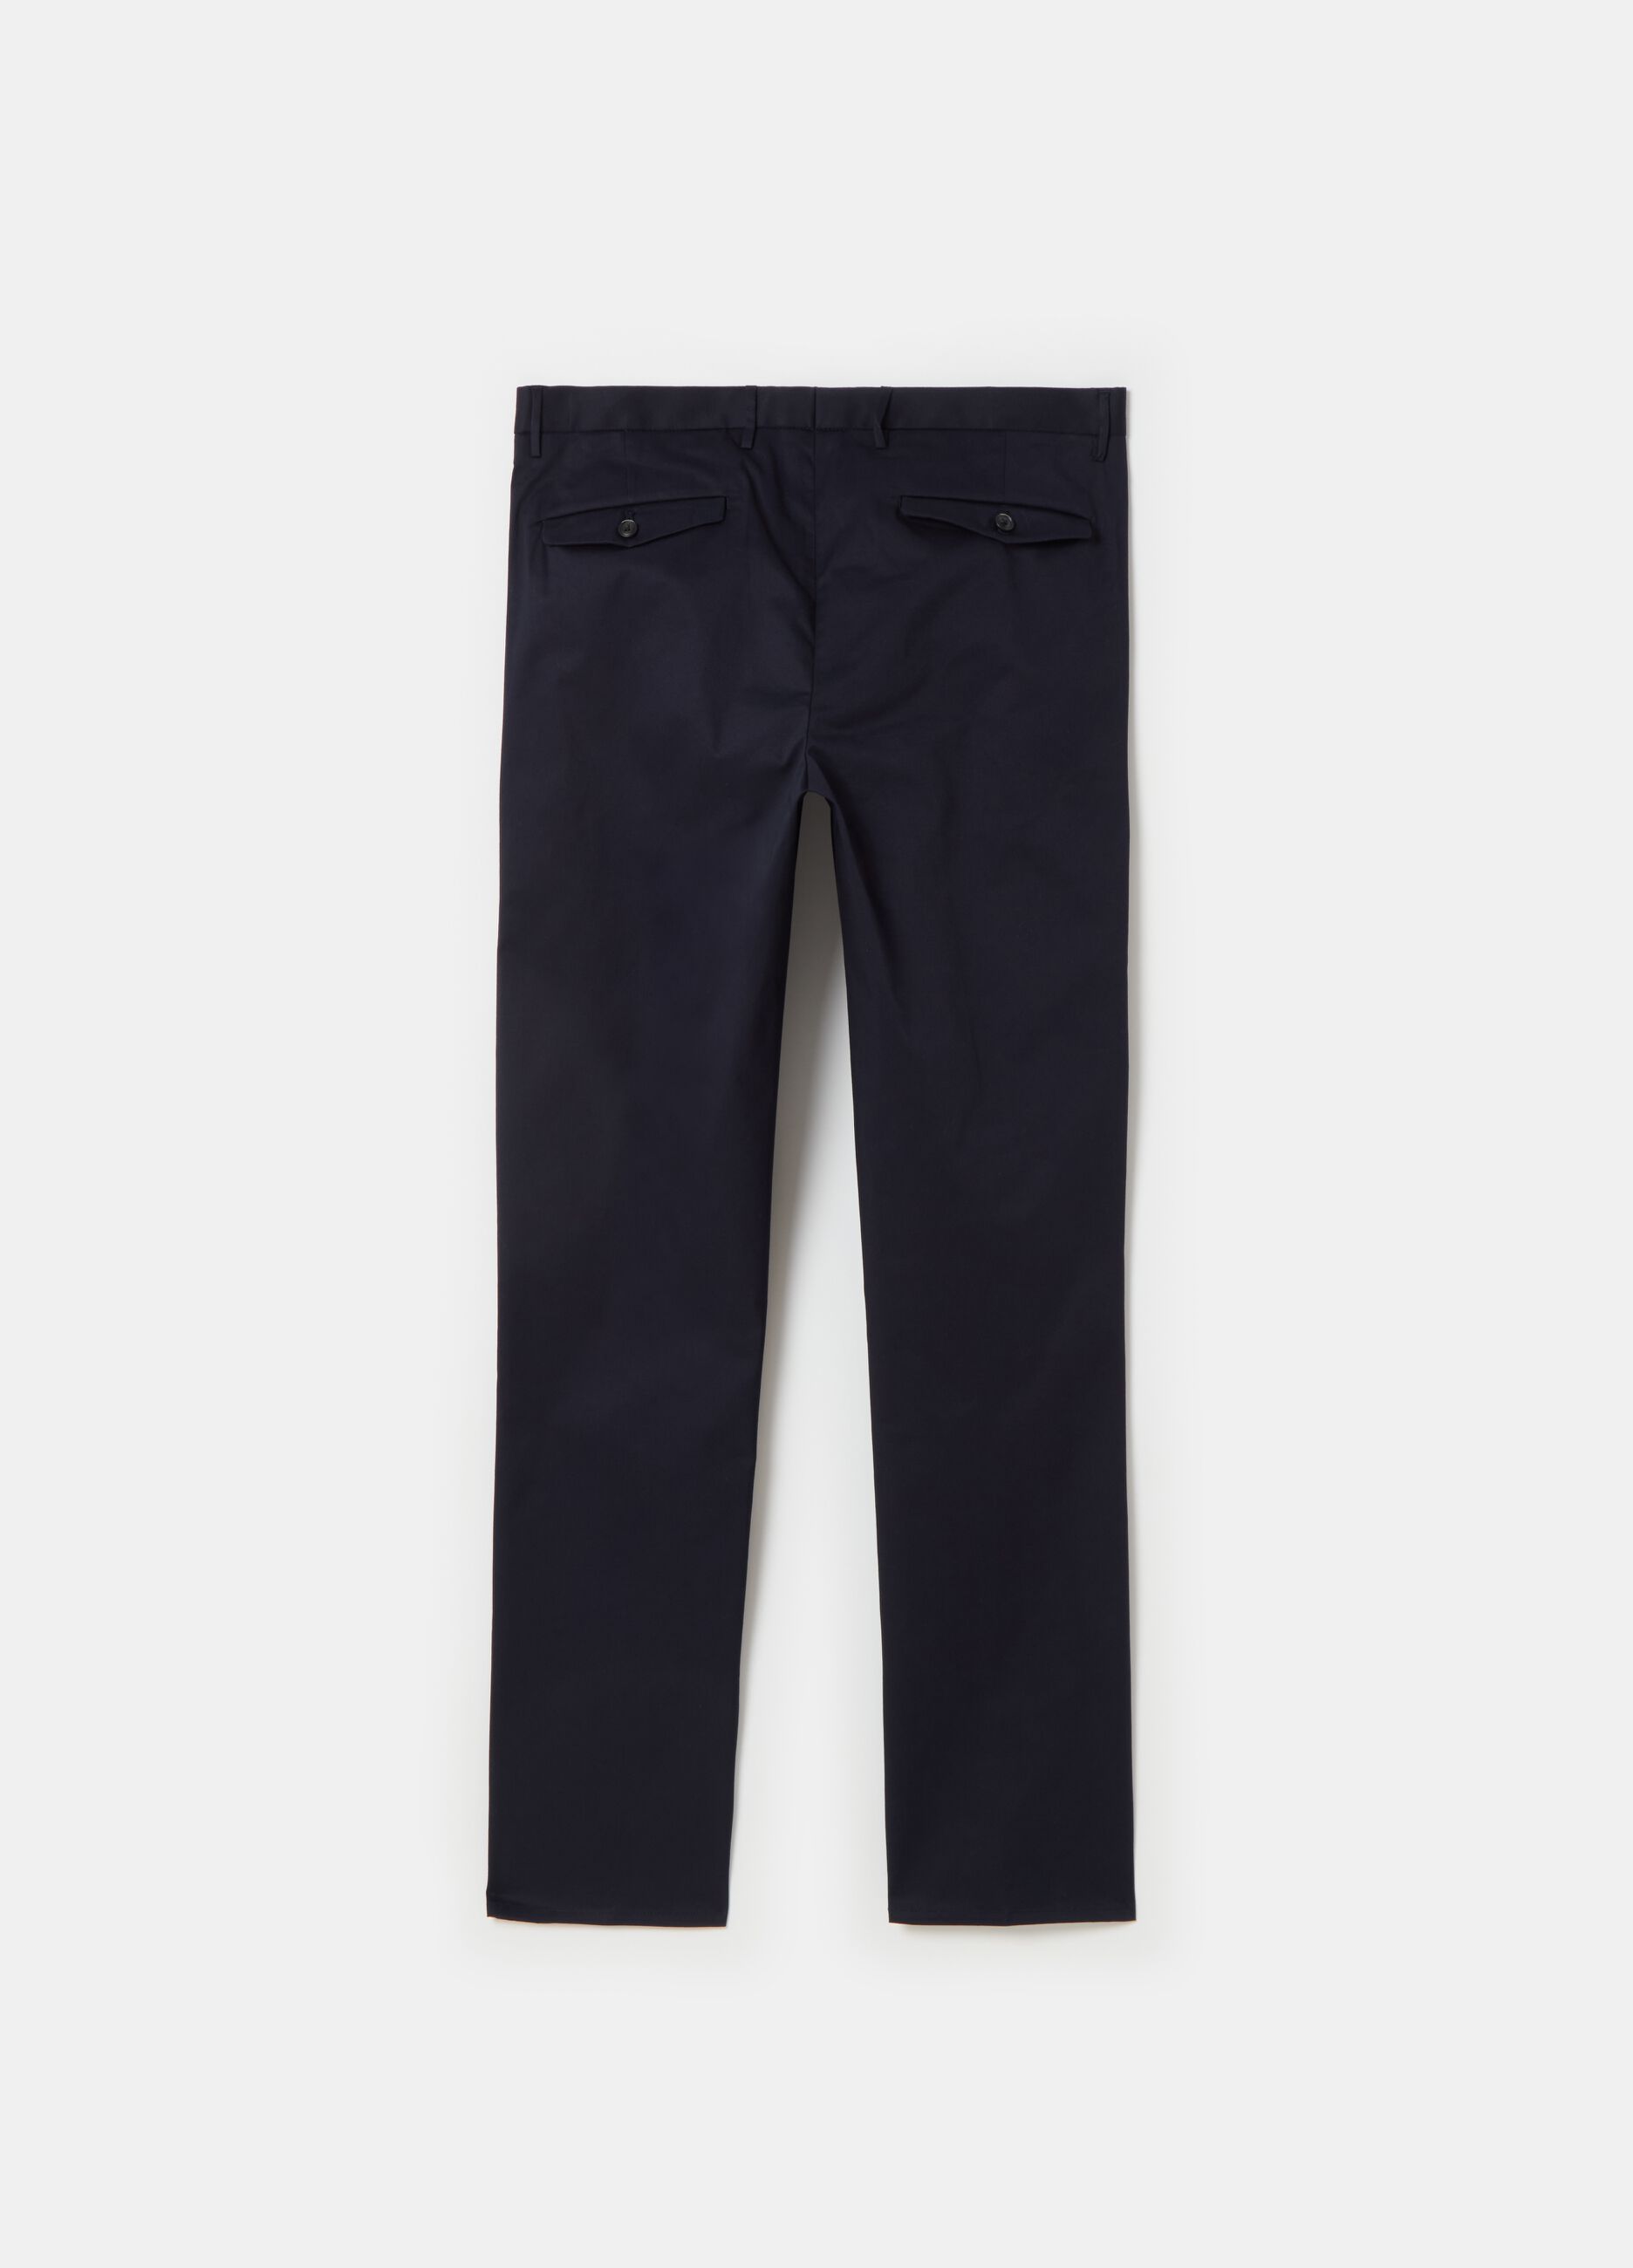 Contemporary chino trousers